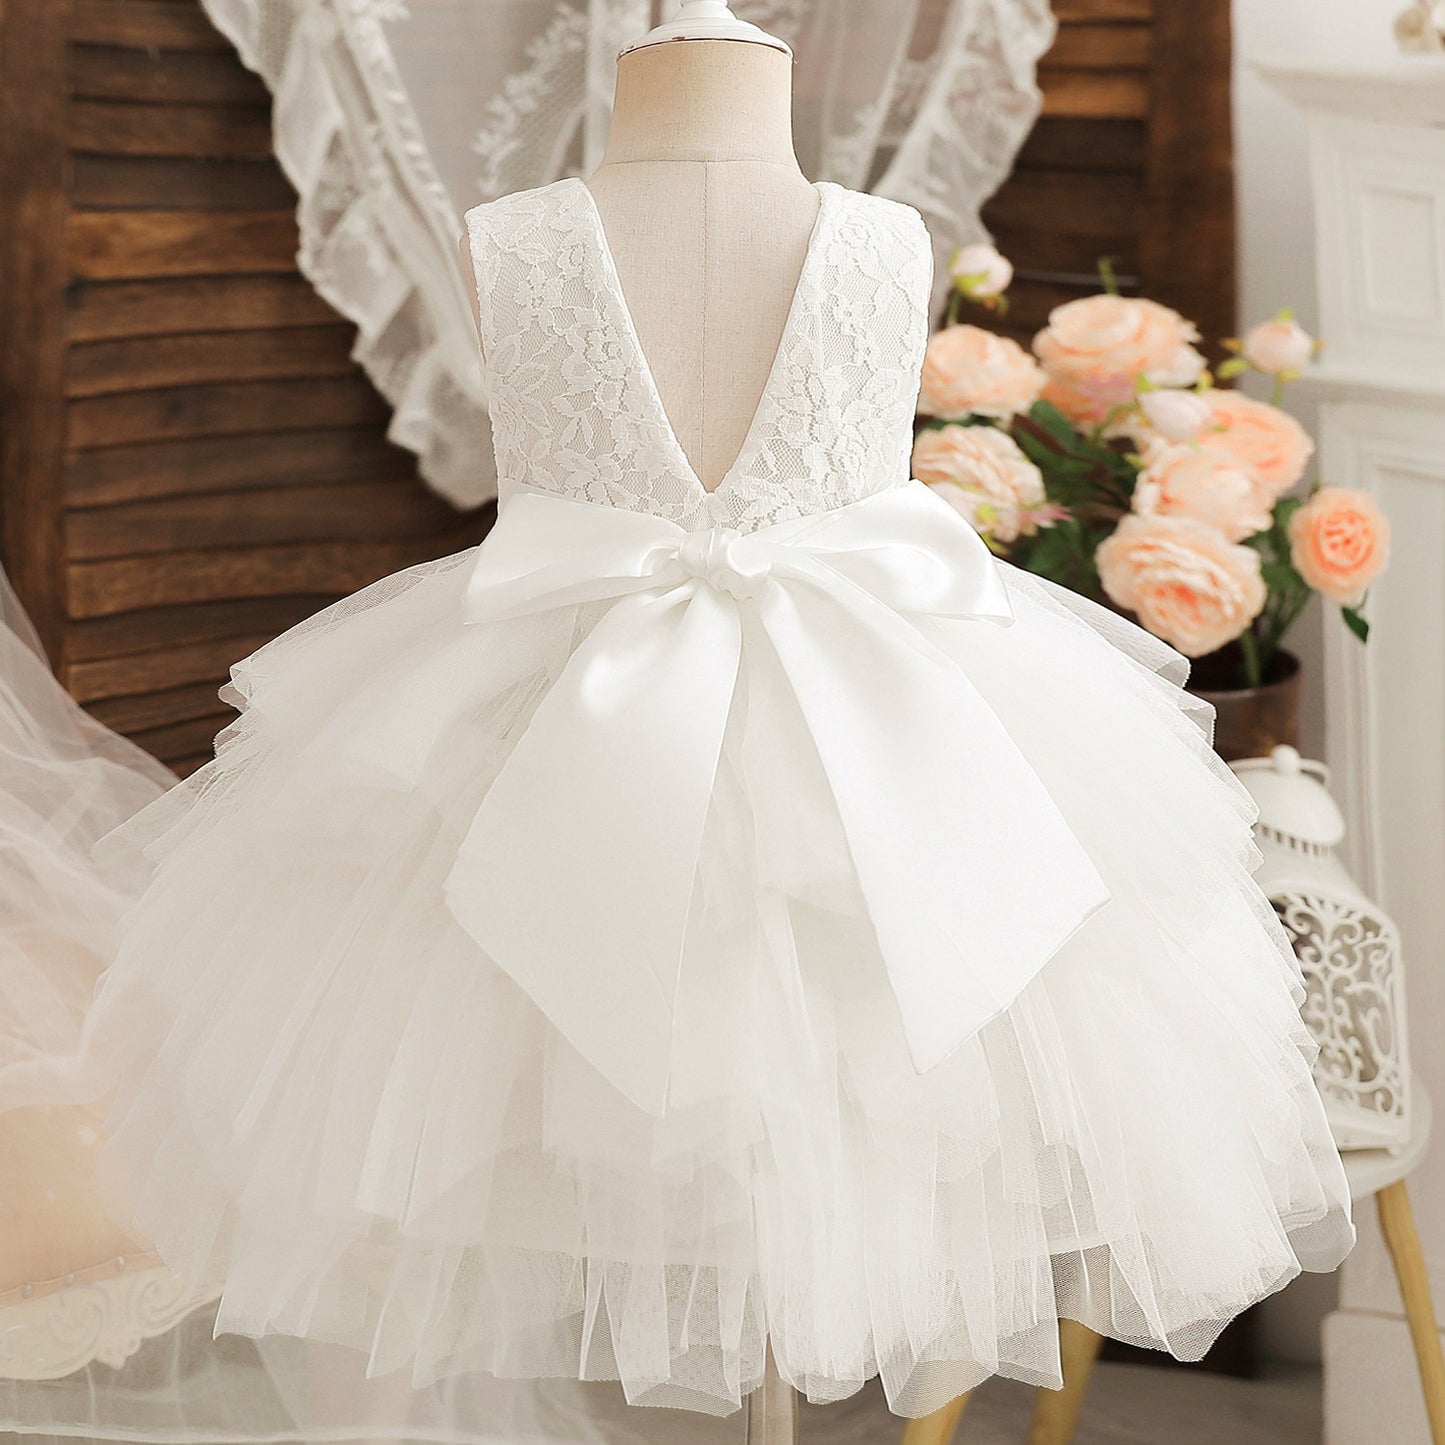 Gorgeous kids ball gown FERNANDA - WF0019 - BRIDAL FASHION ™ | Luxurious  Wedding Dresses & Fashionable Gowns for Women, Girls and Kids